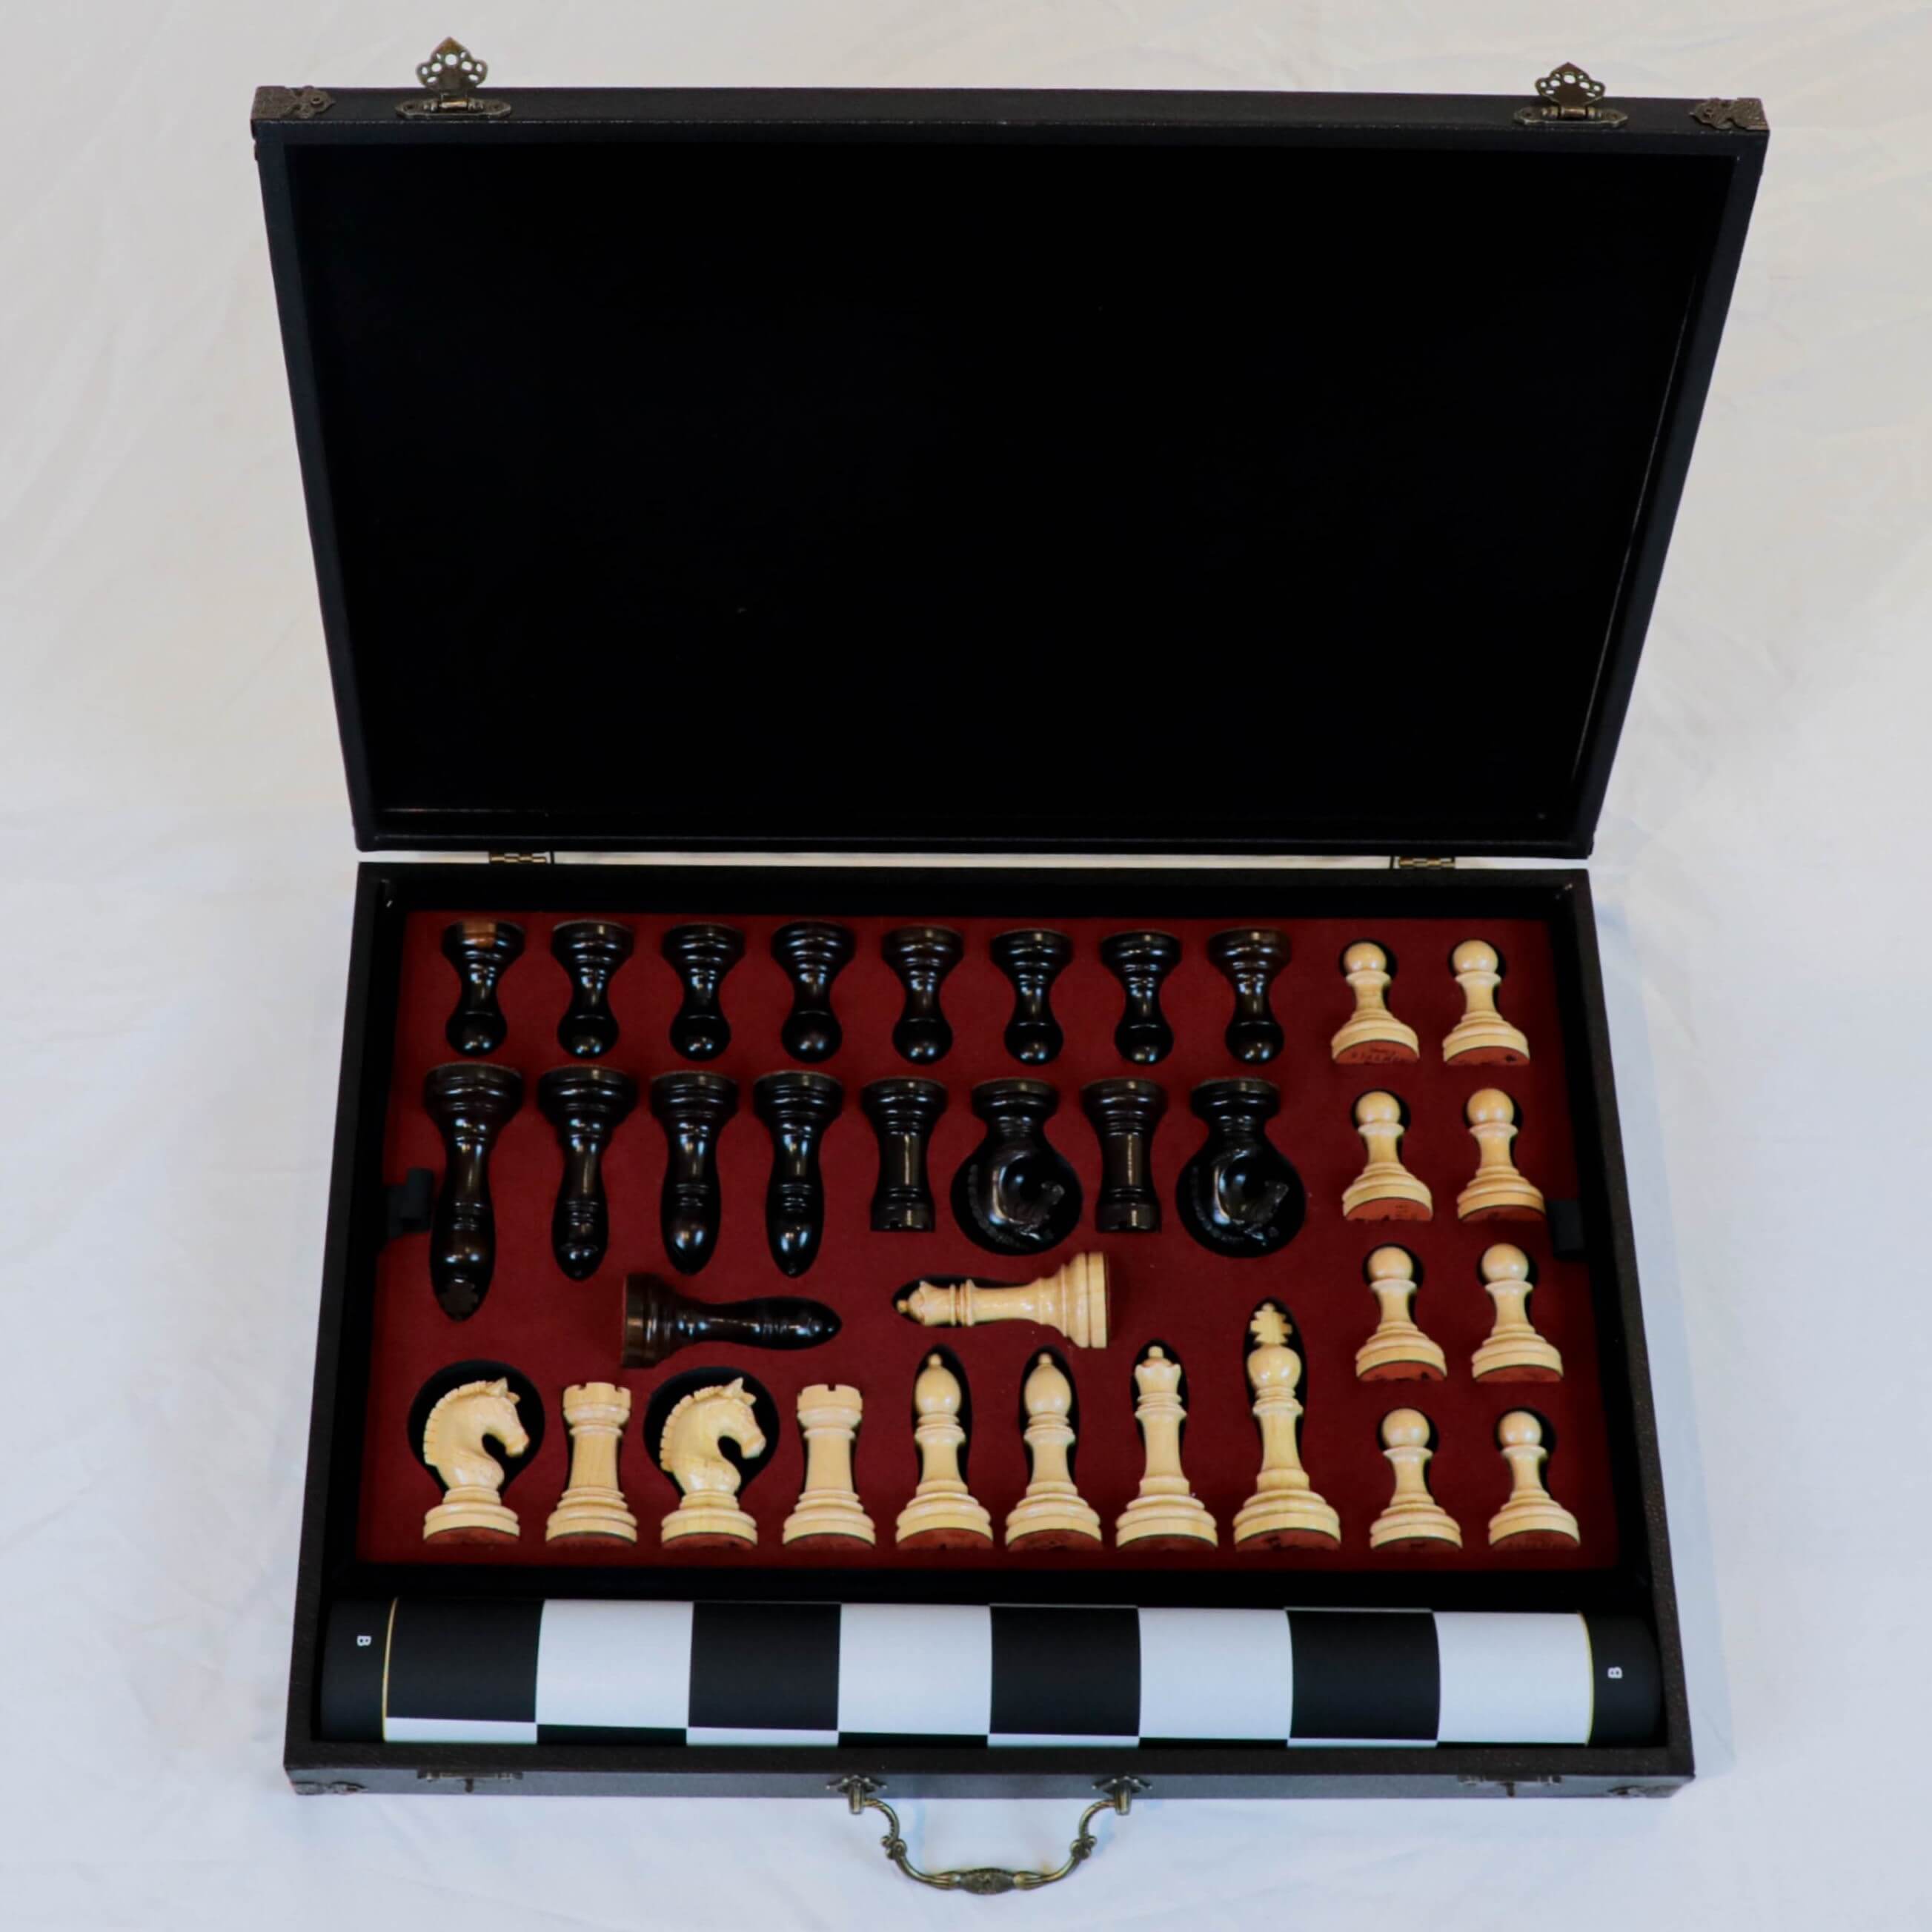 Ebony and Maple Wood Chess Set with Suede Base - Leather Chess Board and Storage Box - Luxury Wooden Chess Set